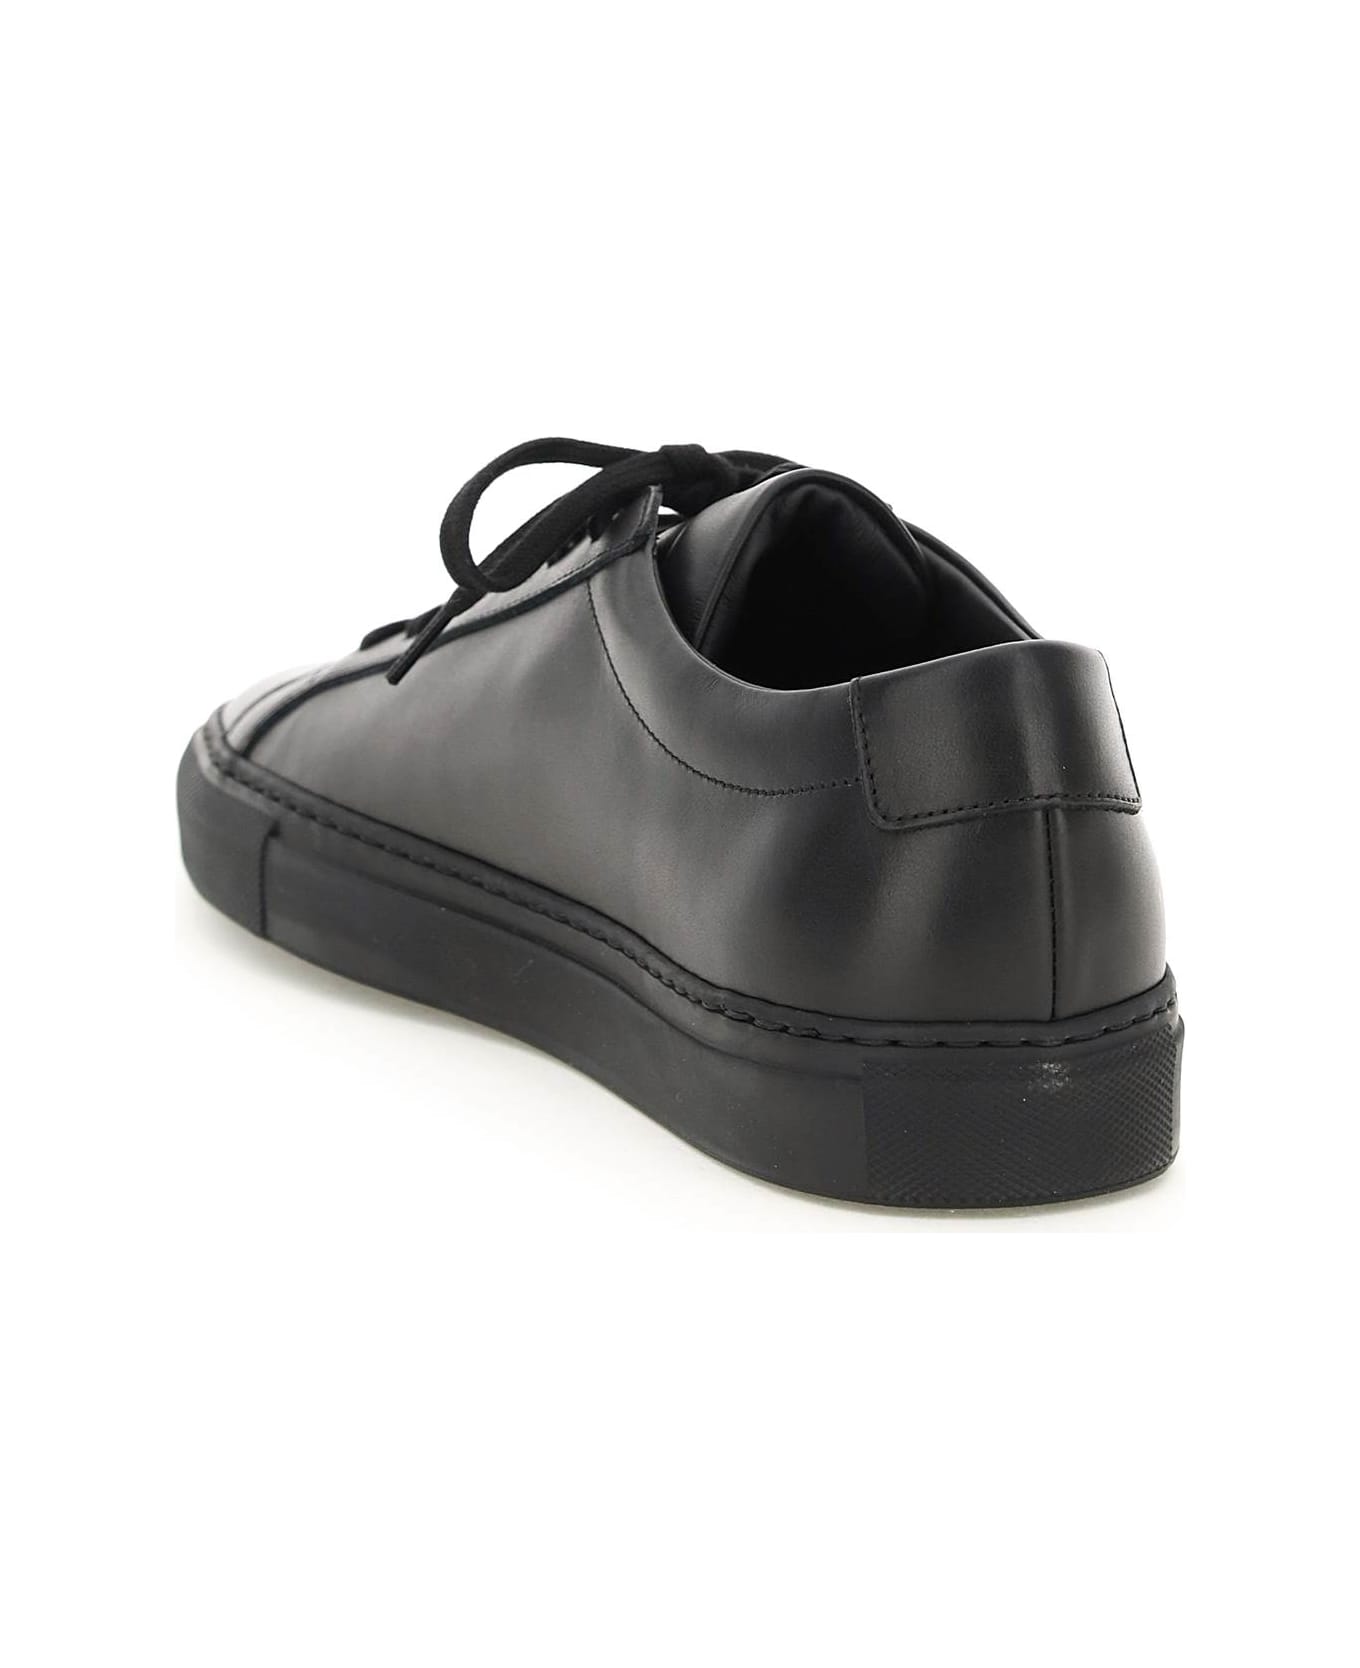 Common Projects Black Leather Achilles Sneakers - Black スニーカー